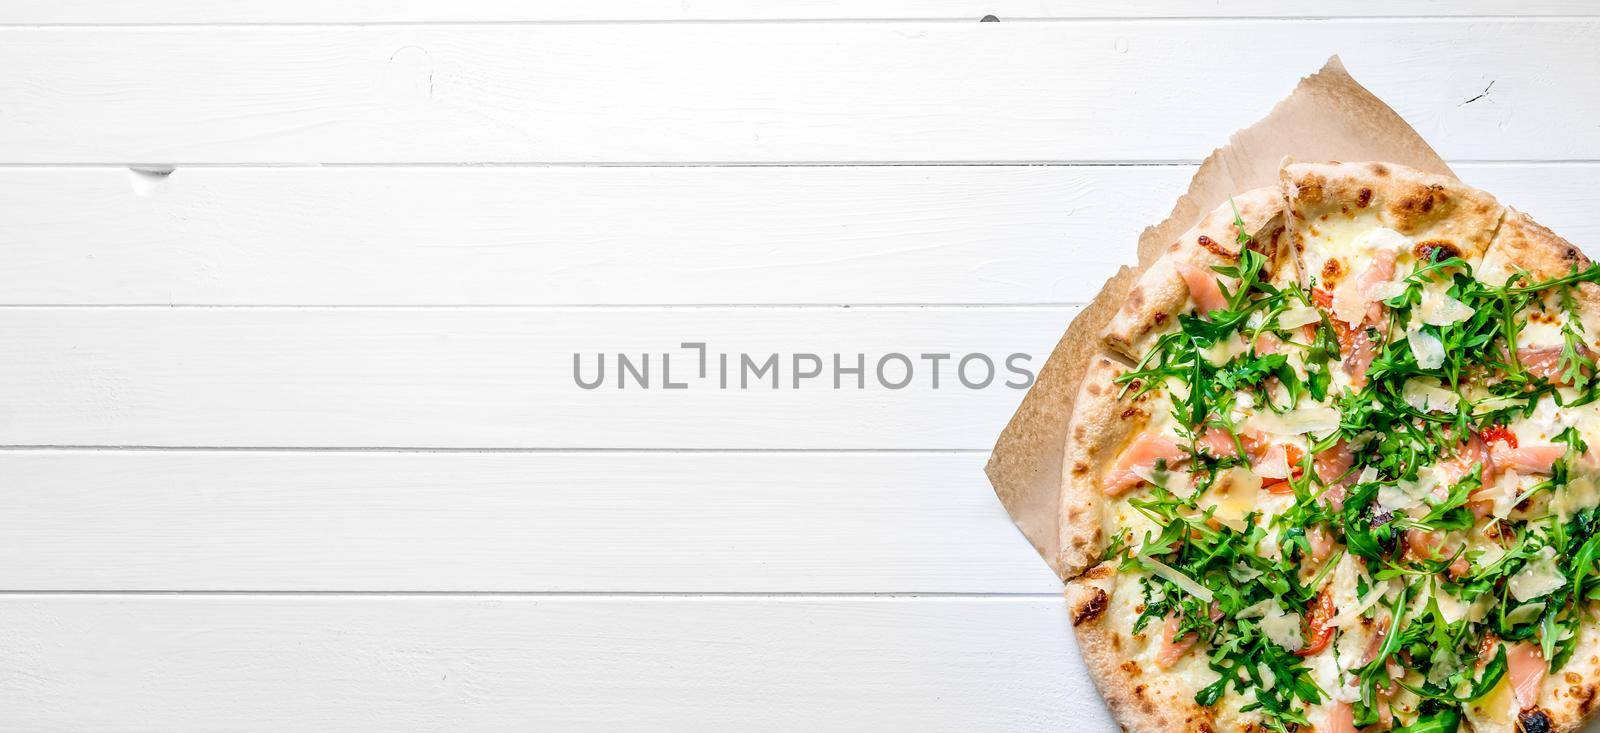 Itallian homemade pizza served on white wooden background with cutlery and cherry tomatoes. Copyspace, top view